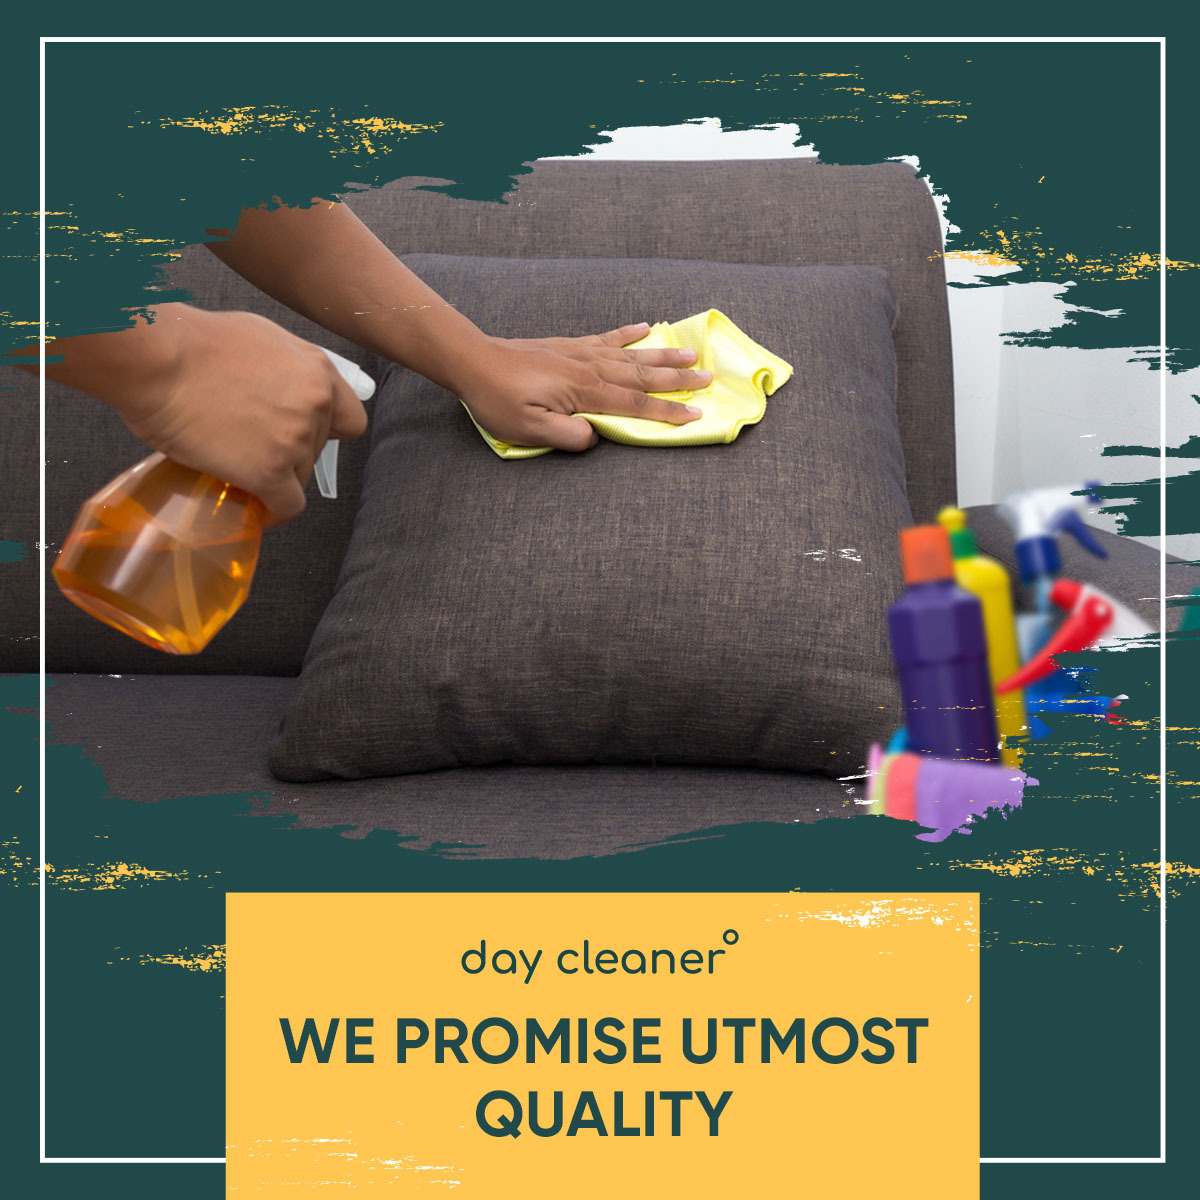 Our quality check policies are designed to provide you with a pleasant experience and utmost satisfaction. 

daycleaner.com

#dubaicleaning #dubaicleaners #generalcleaningdubai #deepcleaningdubai #windowcleaning #carpetcleaning #sofacleaning #curtatincleaning #daycleaner